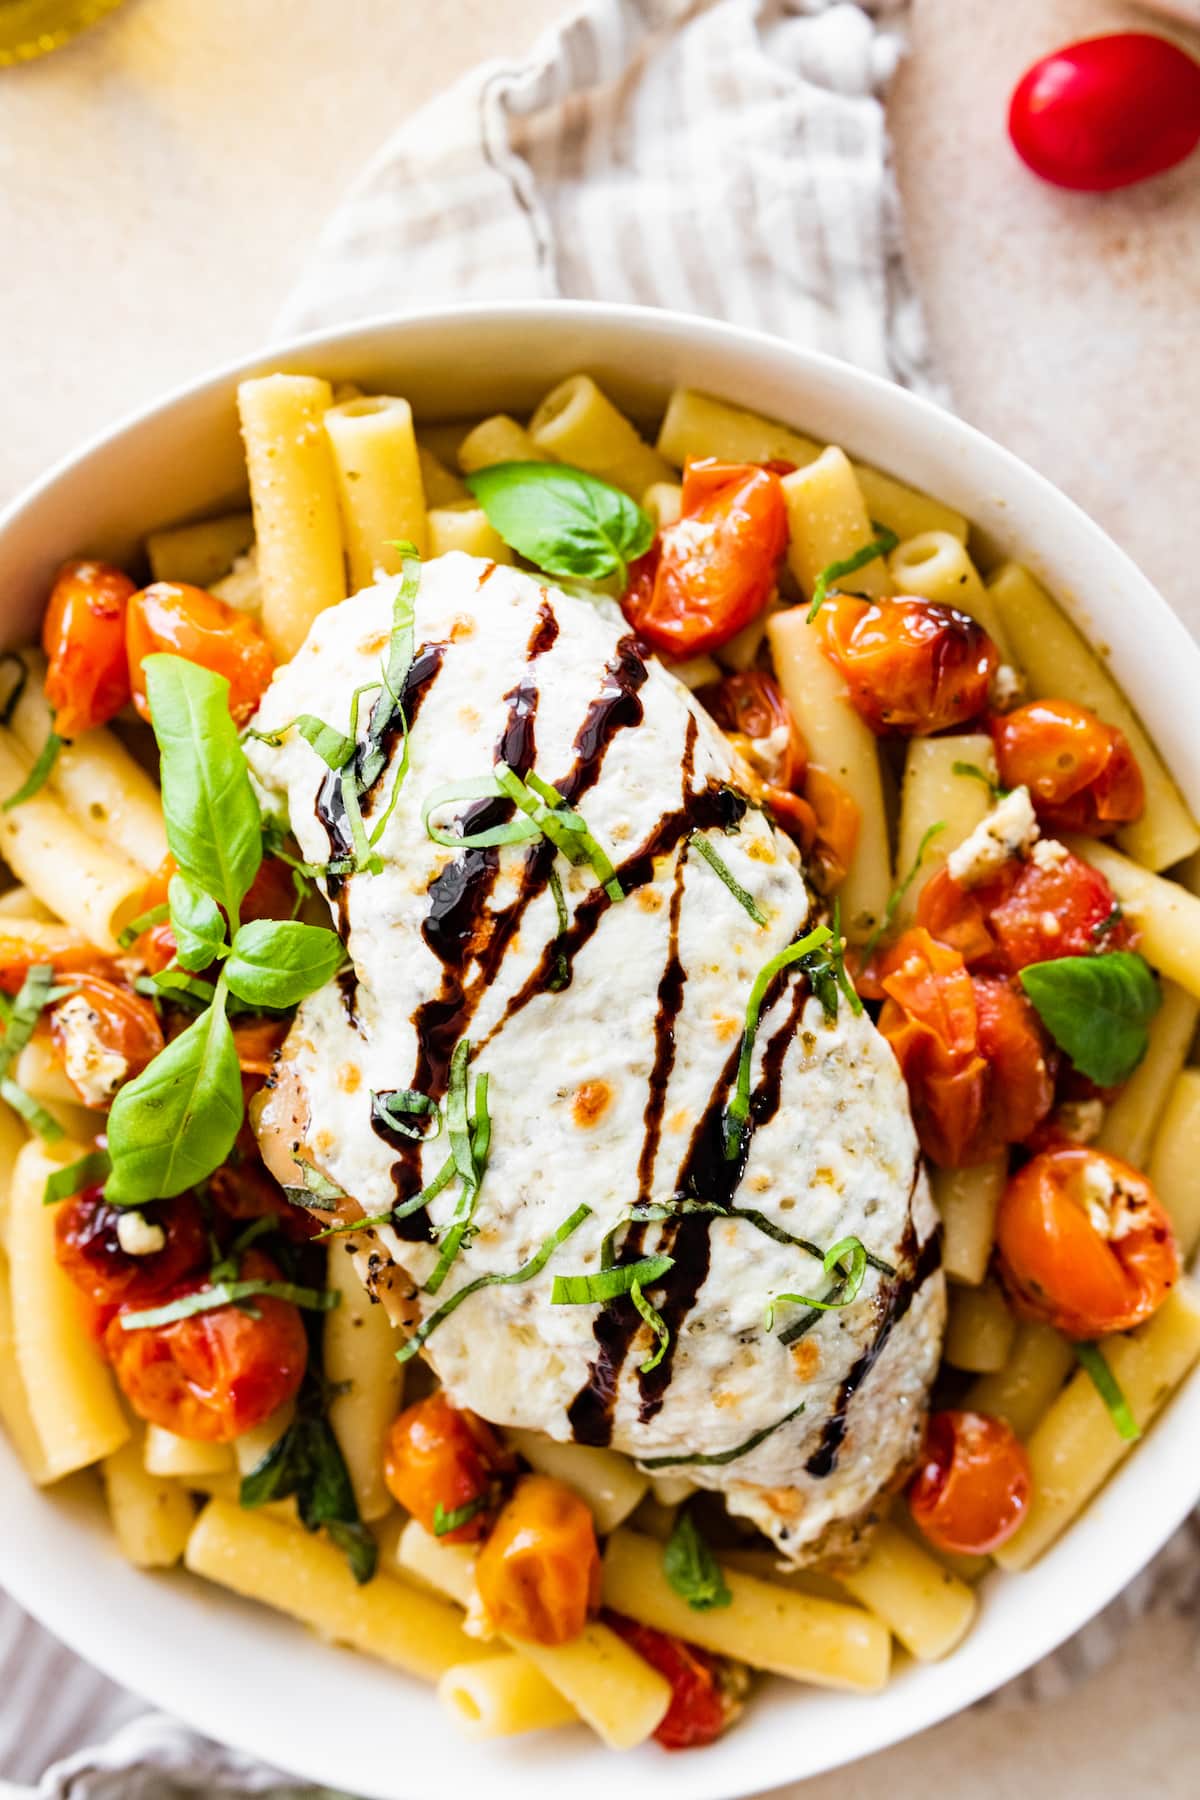 A baked caprese chicken breast with melted mozzarella and a balsamic glaze on top of a bowl of pasta.